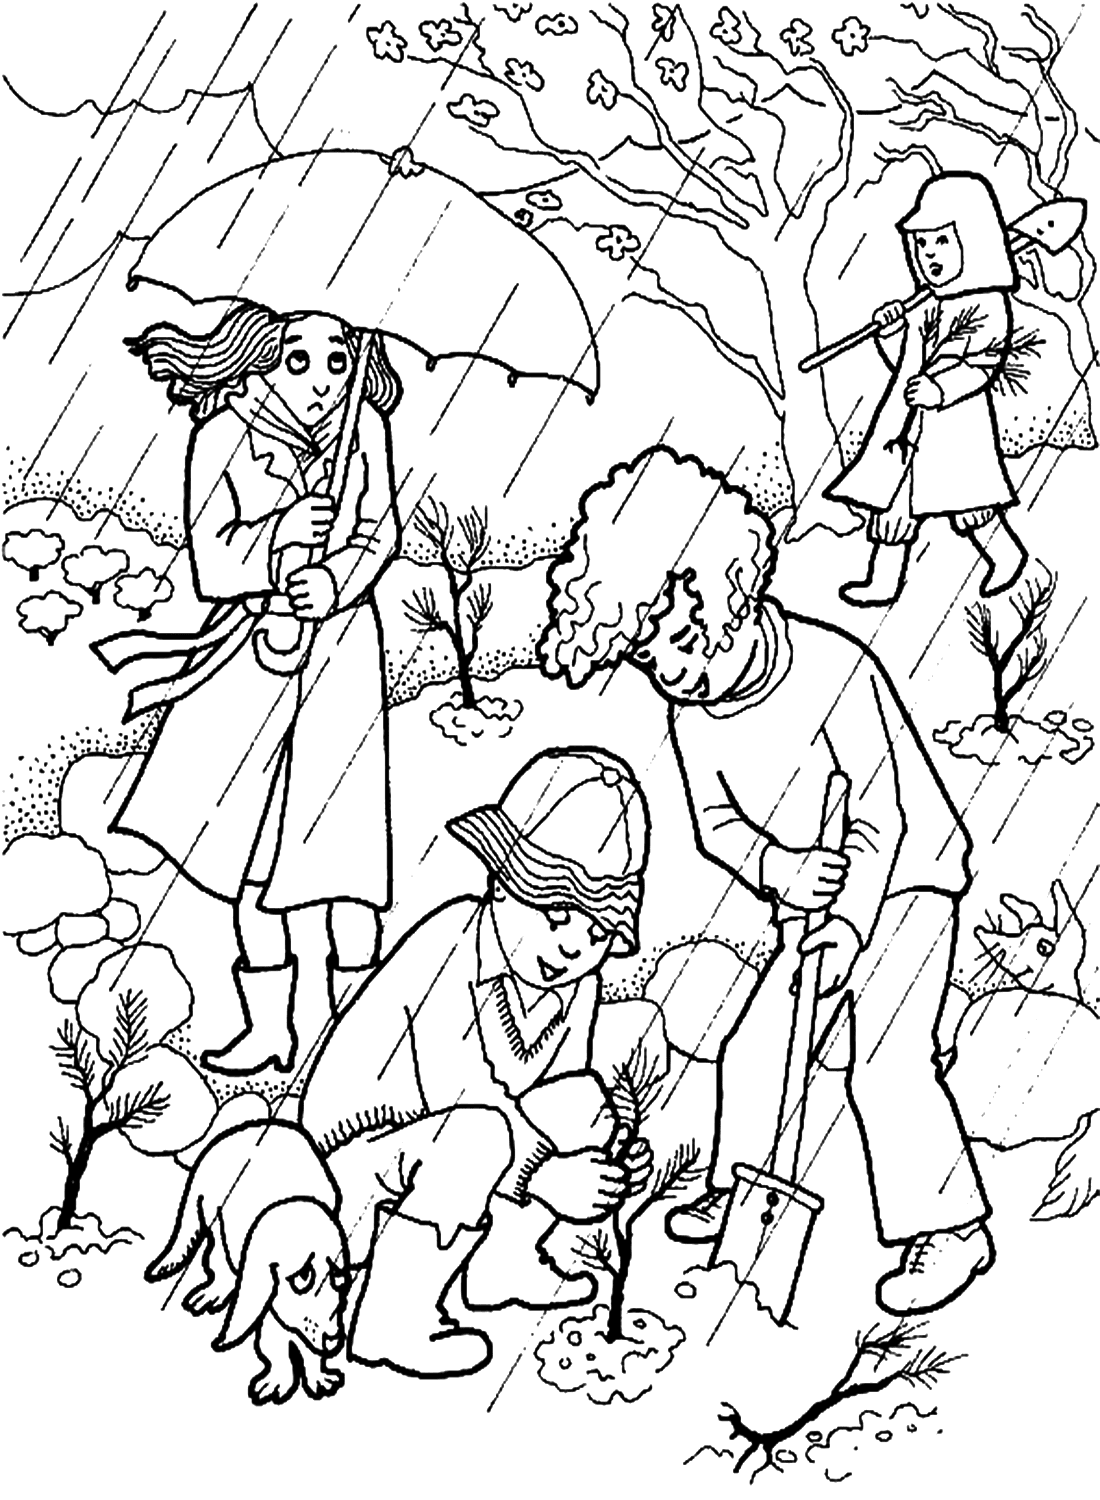 Boys  Planting Trees Coloring Page